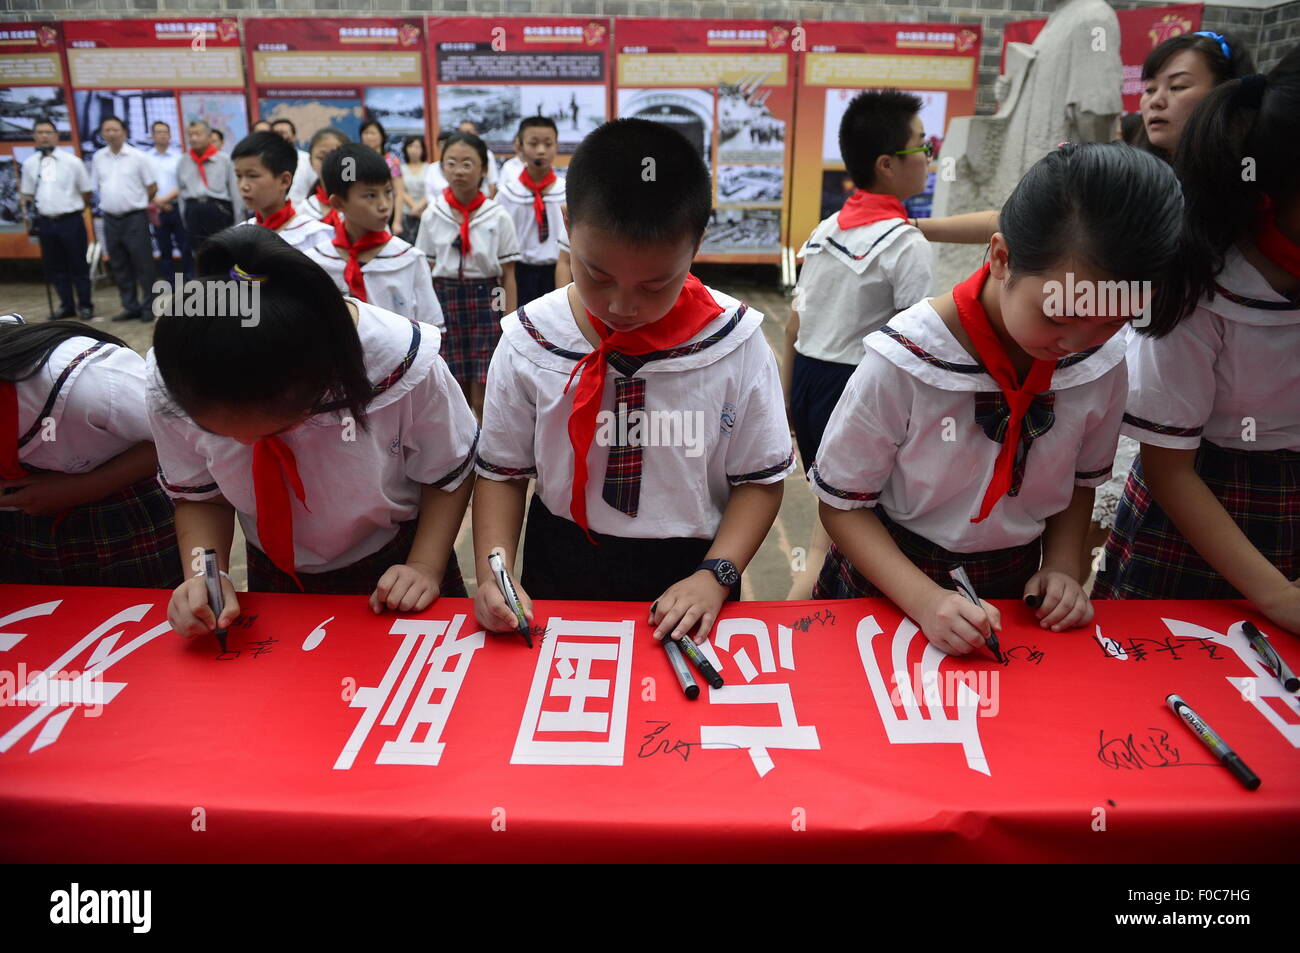 (150812) -- NANCHANG, Aug. 12, 2015 (Xinhua) -- Pupils sign their names on a banner while visiting the former residence of Mei Ru'ao, the Chinese judge at the International Military Tribunal for the Far East, during an activity marking the 70th anniversary of victory in the Chinese People's War of Resistance Against Japanese Aggression in Qingyunpu District of Nanchang, east China's Jiangxi Province, Aug. 12, 2015. (Xinhua/Zhou Mi) (xcf) Stock Photo